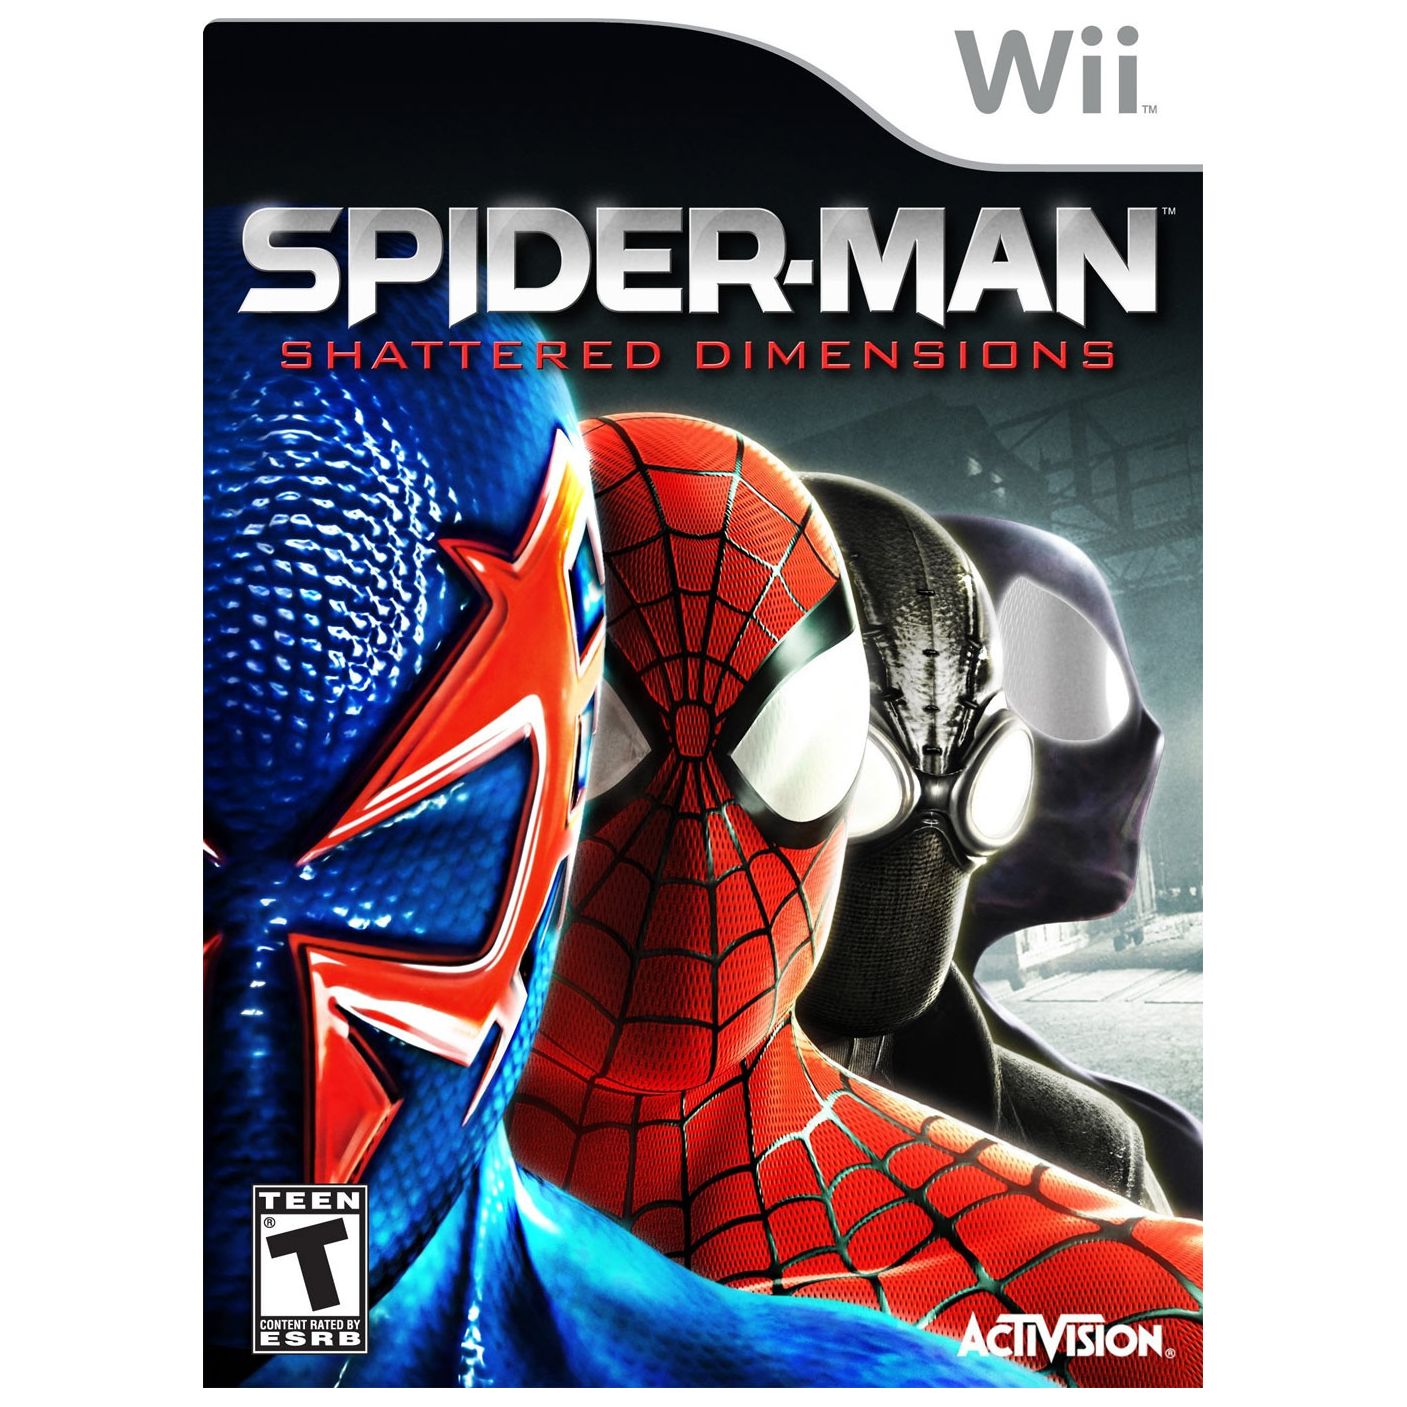 SPIDER-MAN SHATTERED DIMENSIONS (used)